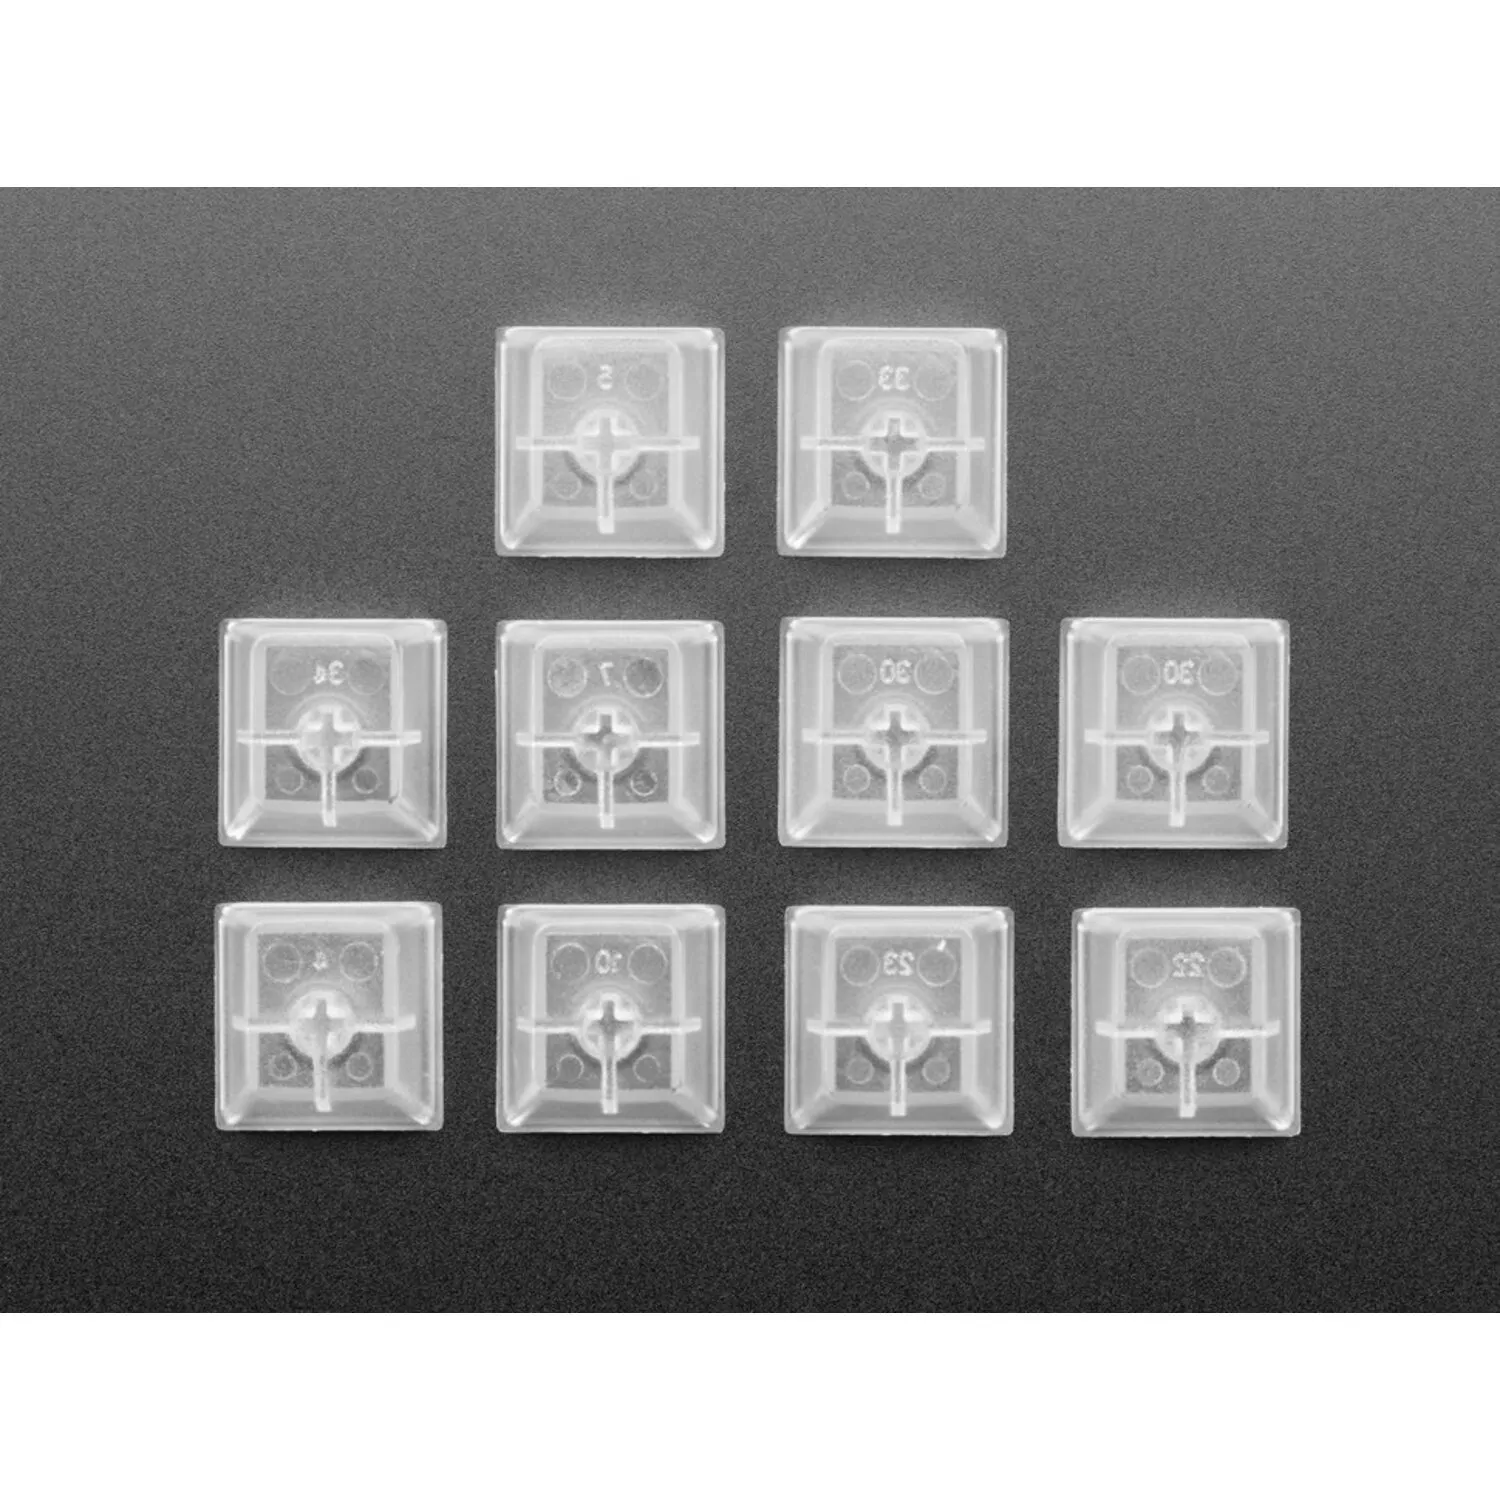 Photo of Translucent Keycaps for MX Compatible Switches - 10 pack